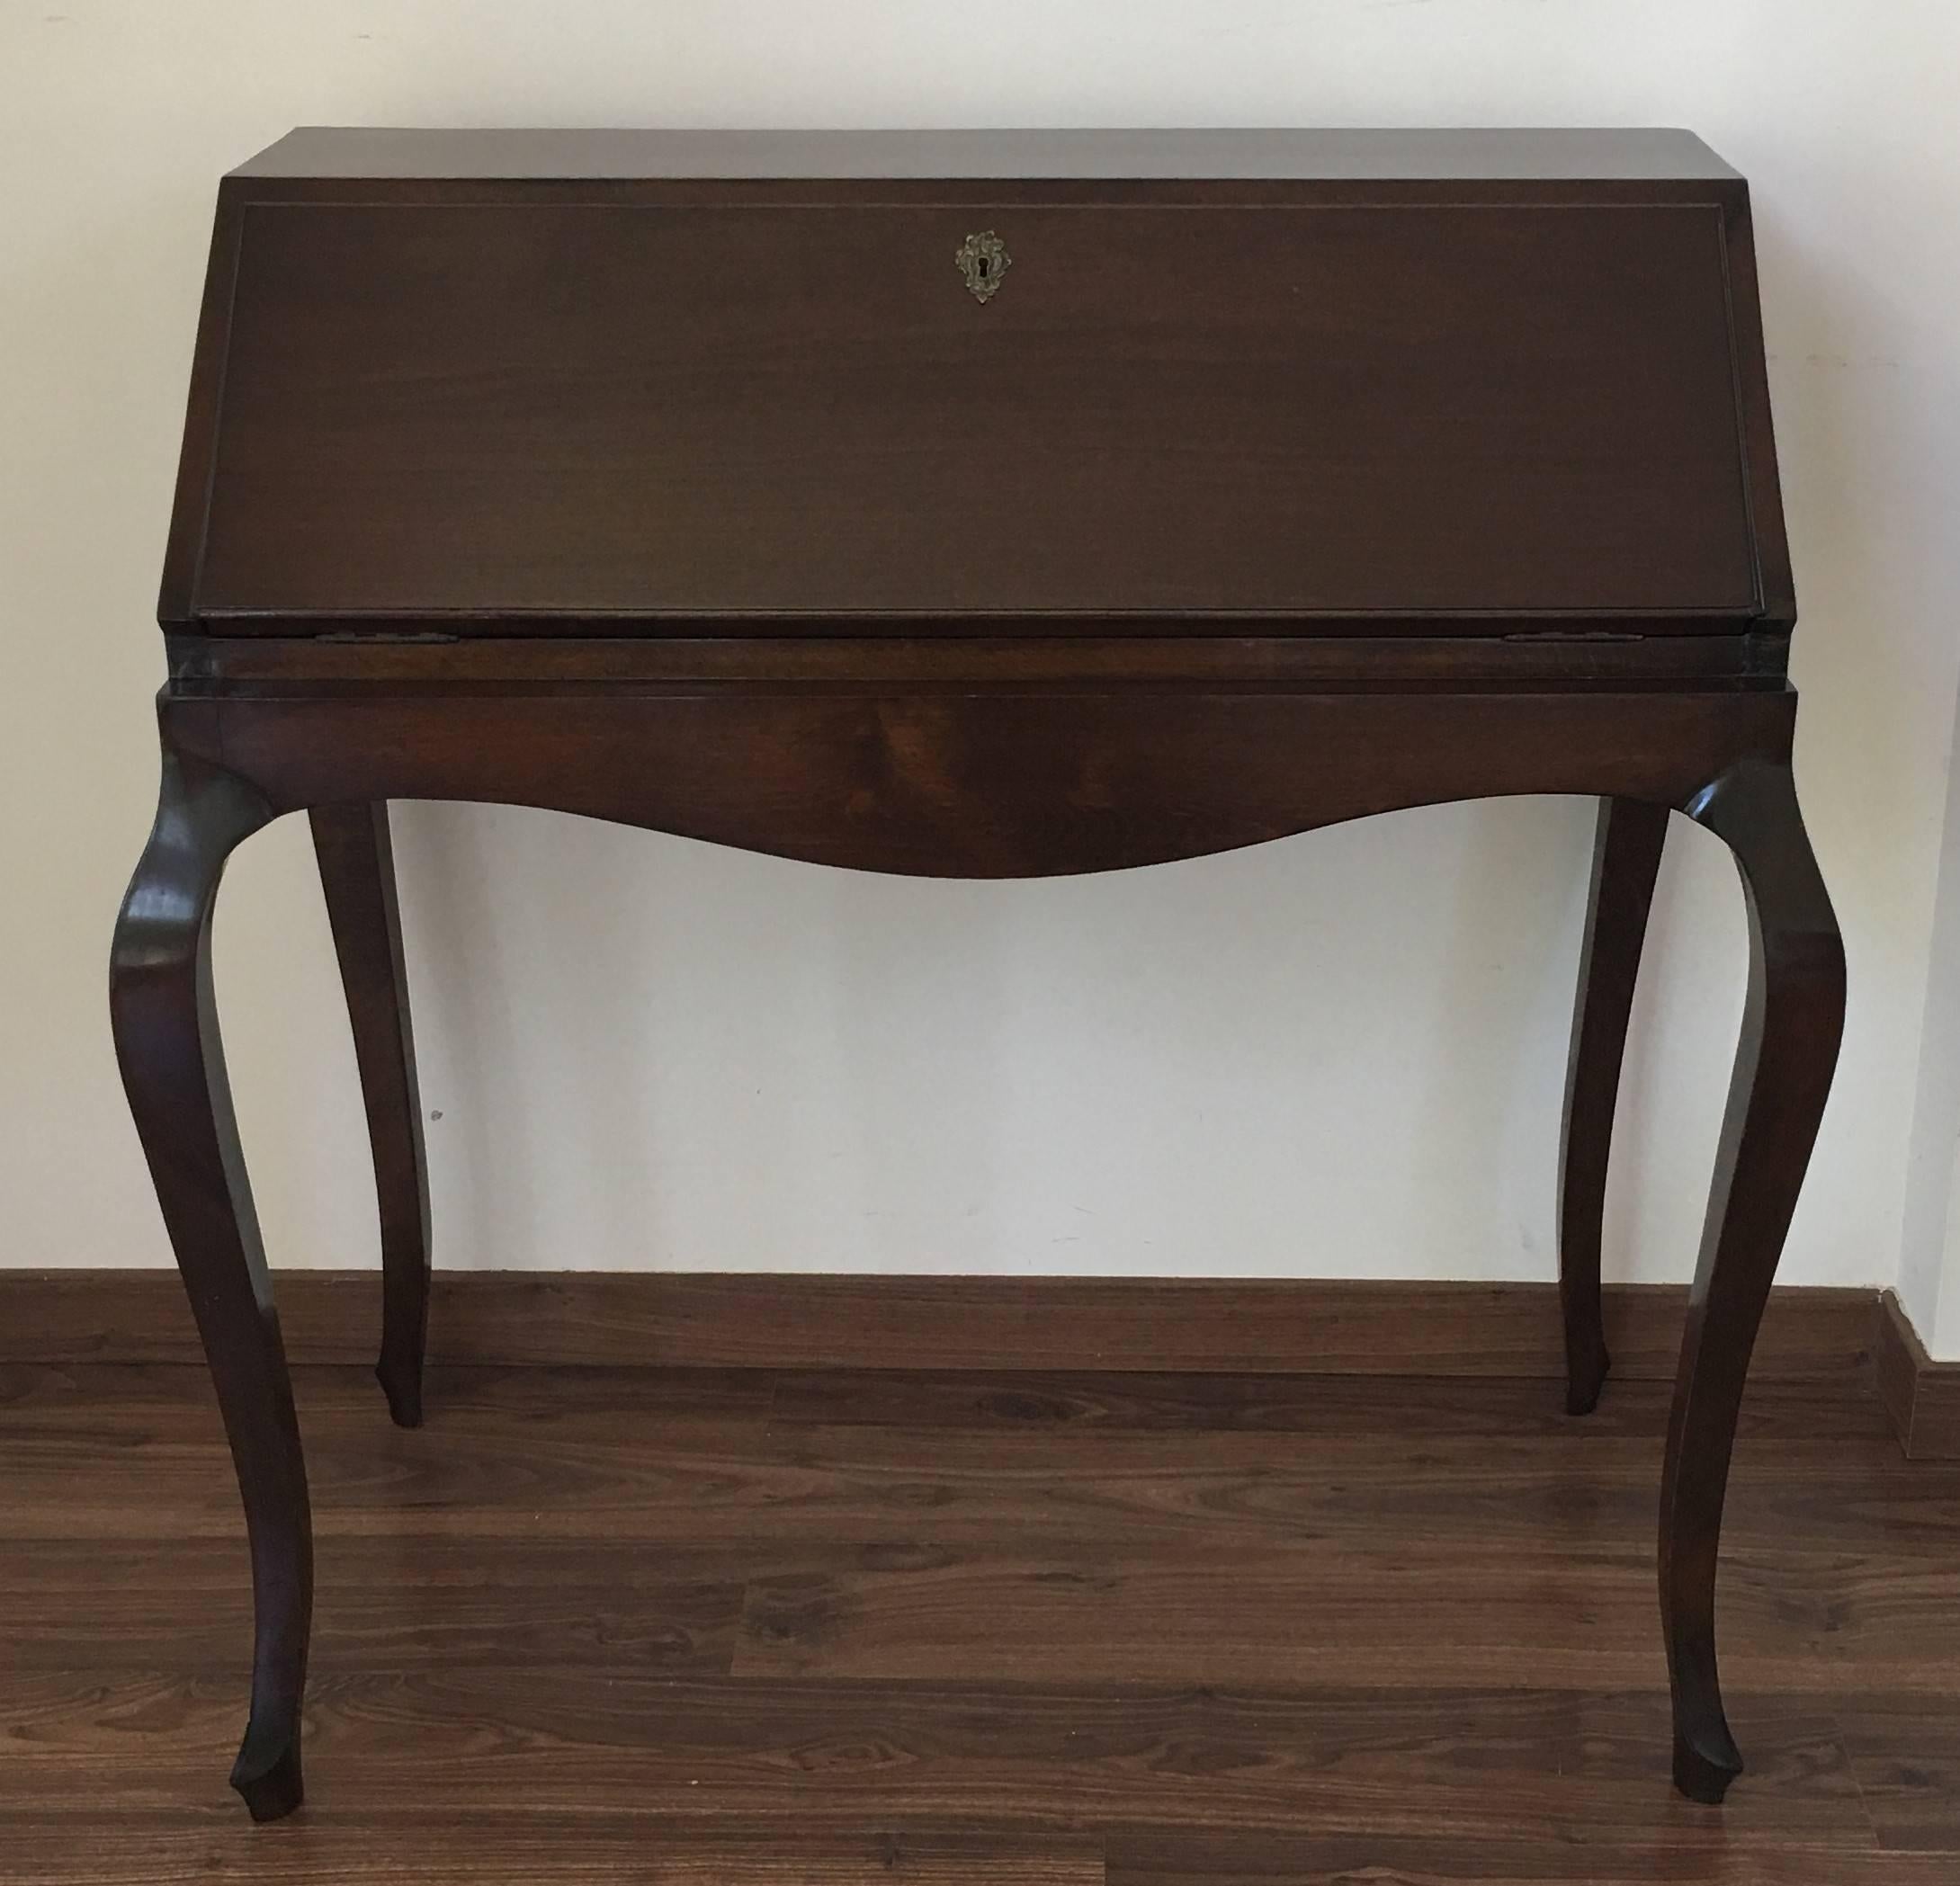 20th century Queen Anne style lady writing desk. Bureau
 
Measure: Total depth 27.95in (top opens)

